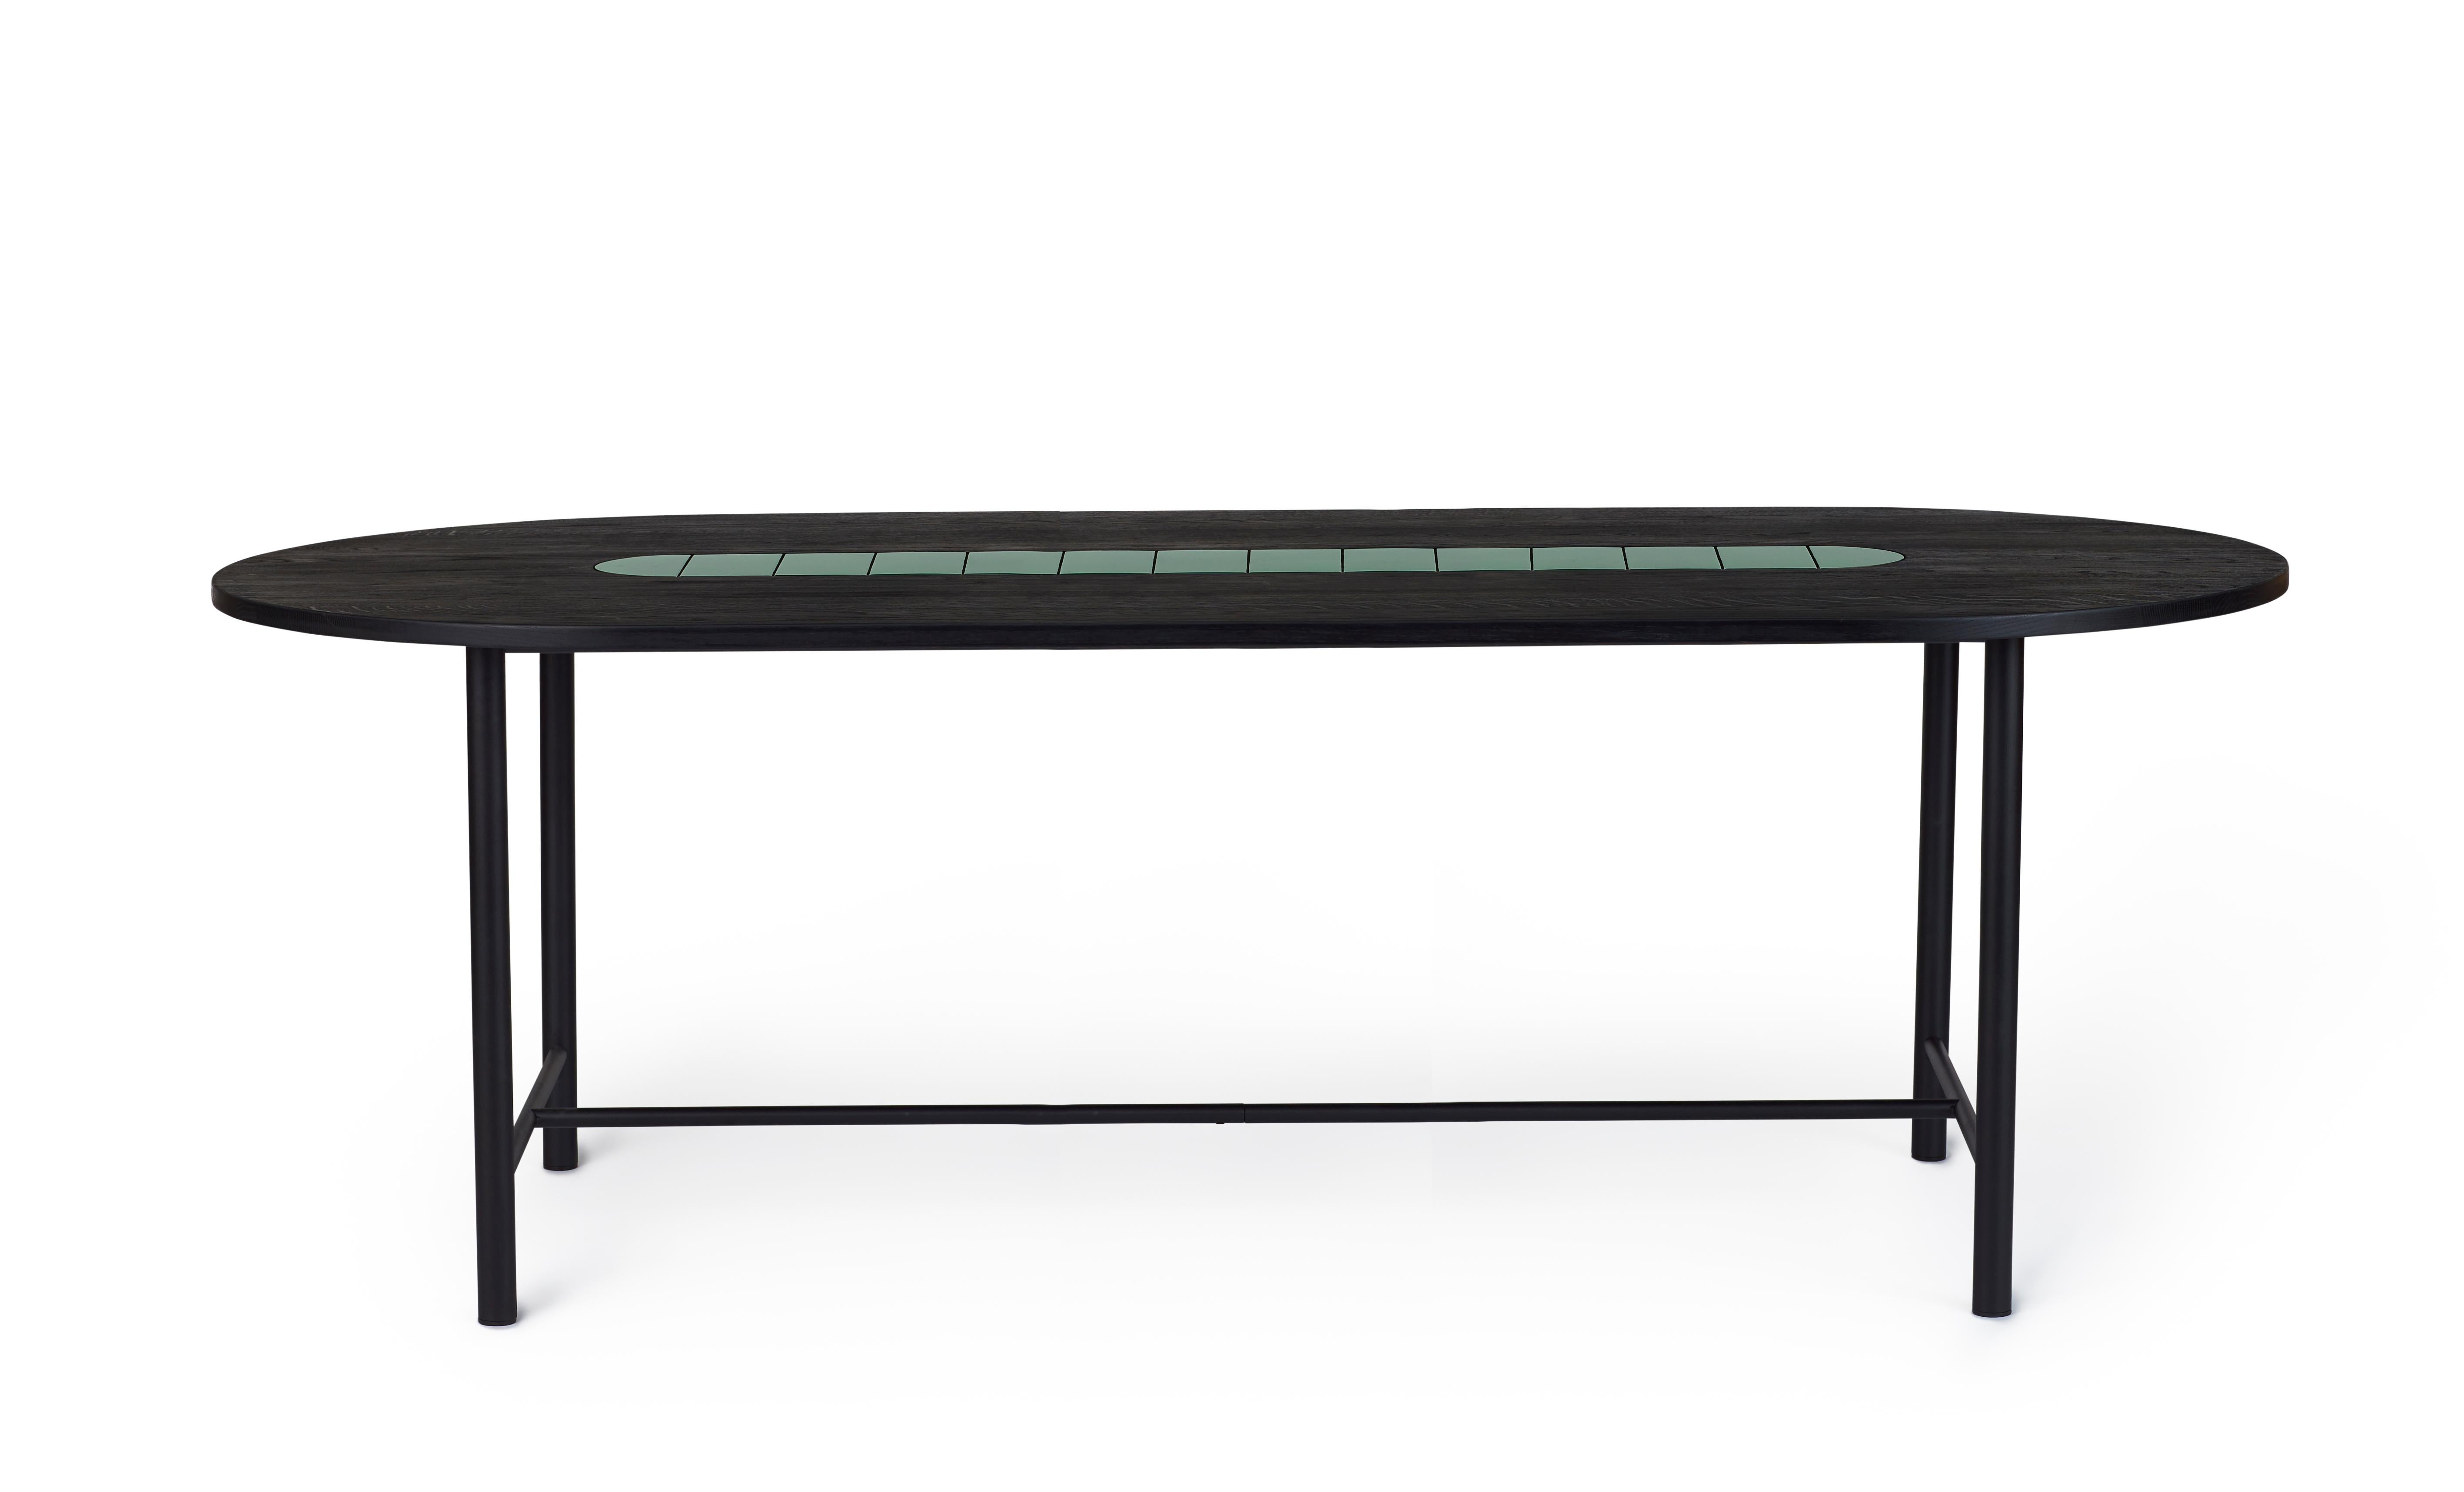 For Sale: Green (Forest green) Be My Guest Large Dining Table, by Charlotte Høncke from Warm Nordic